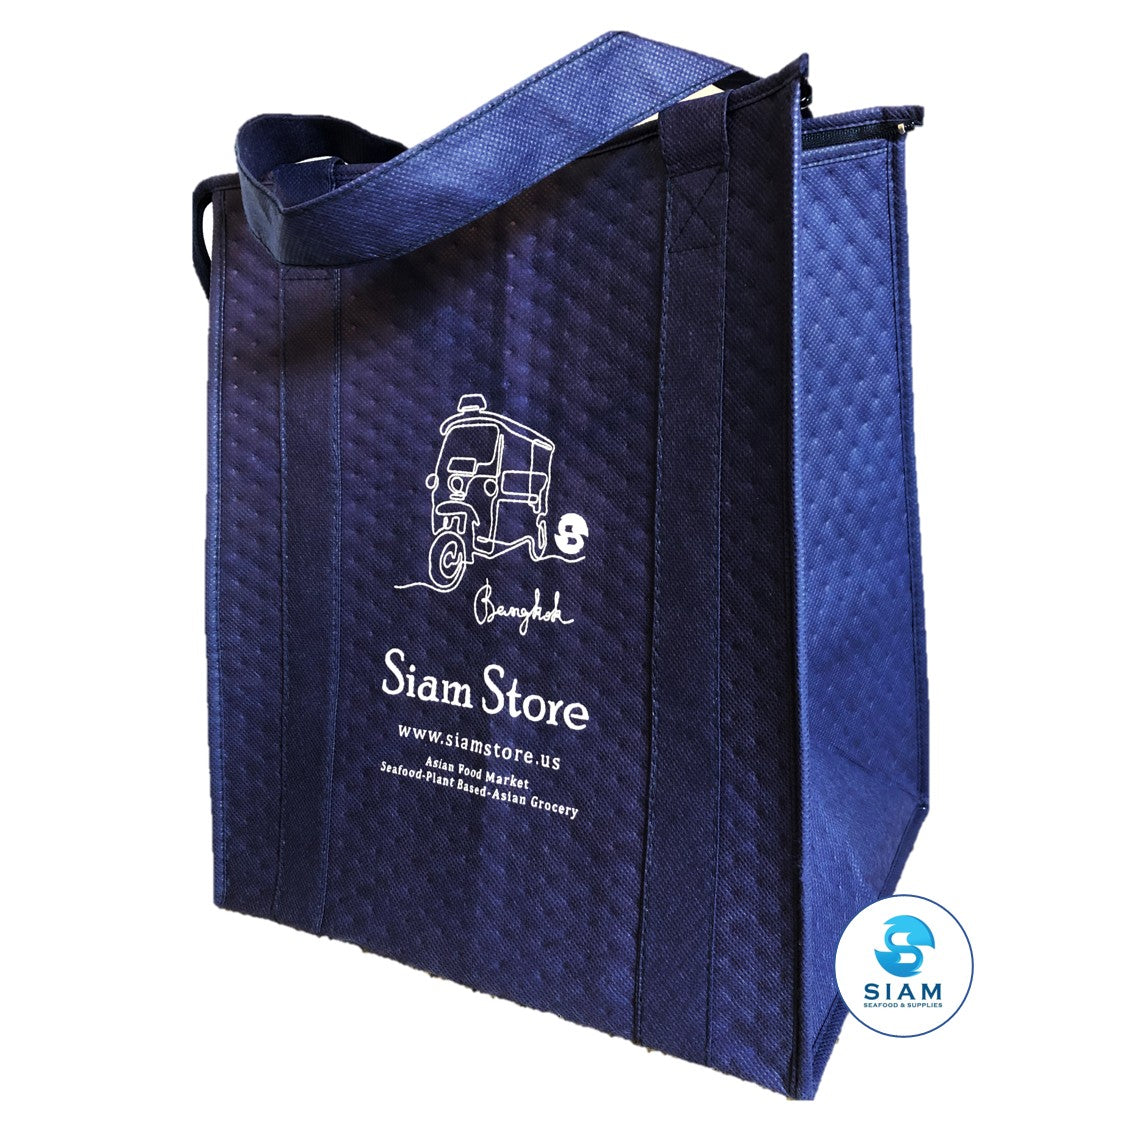 Premium Insulated Grocery Bag (7.2 oz) shippable Siam Store - Thai & Asian Food Market